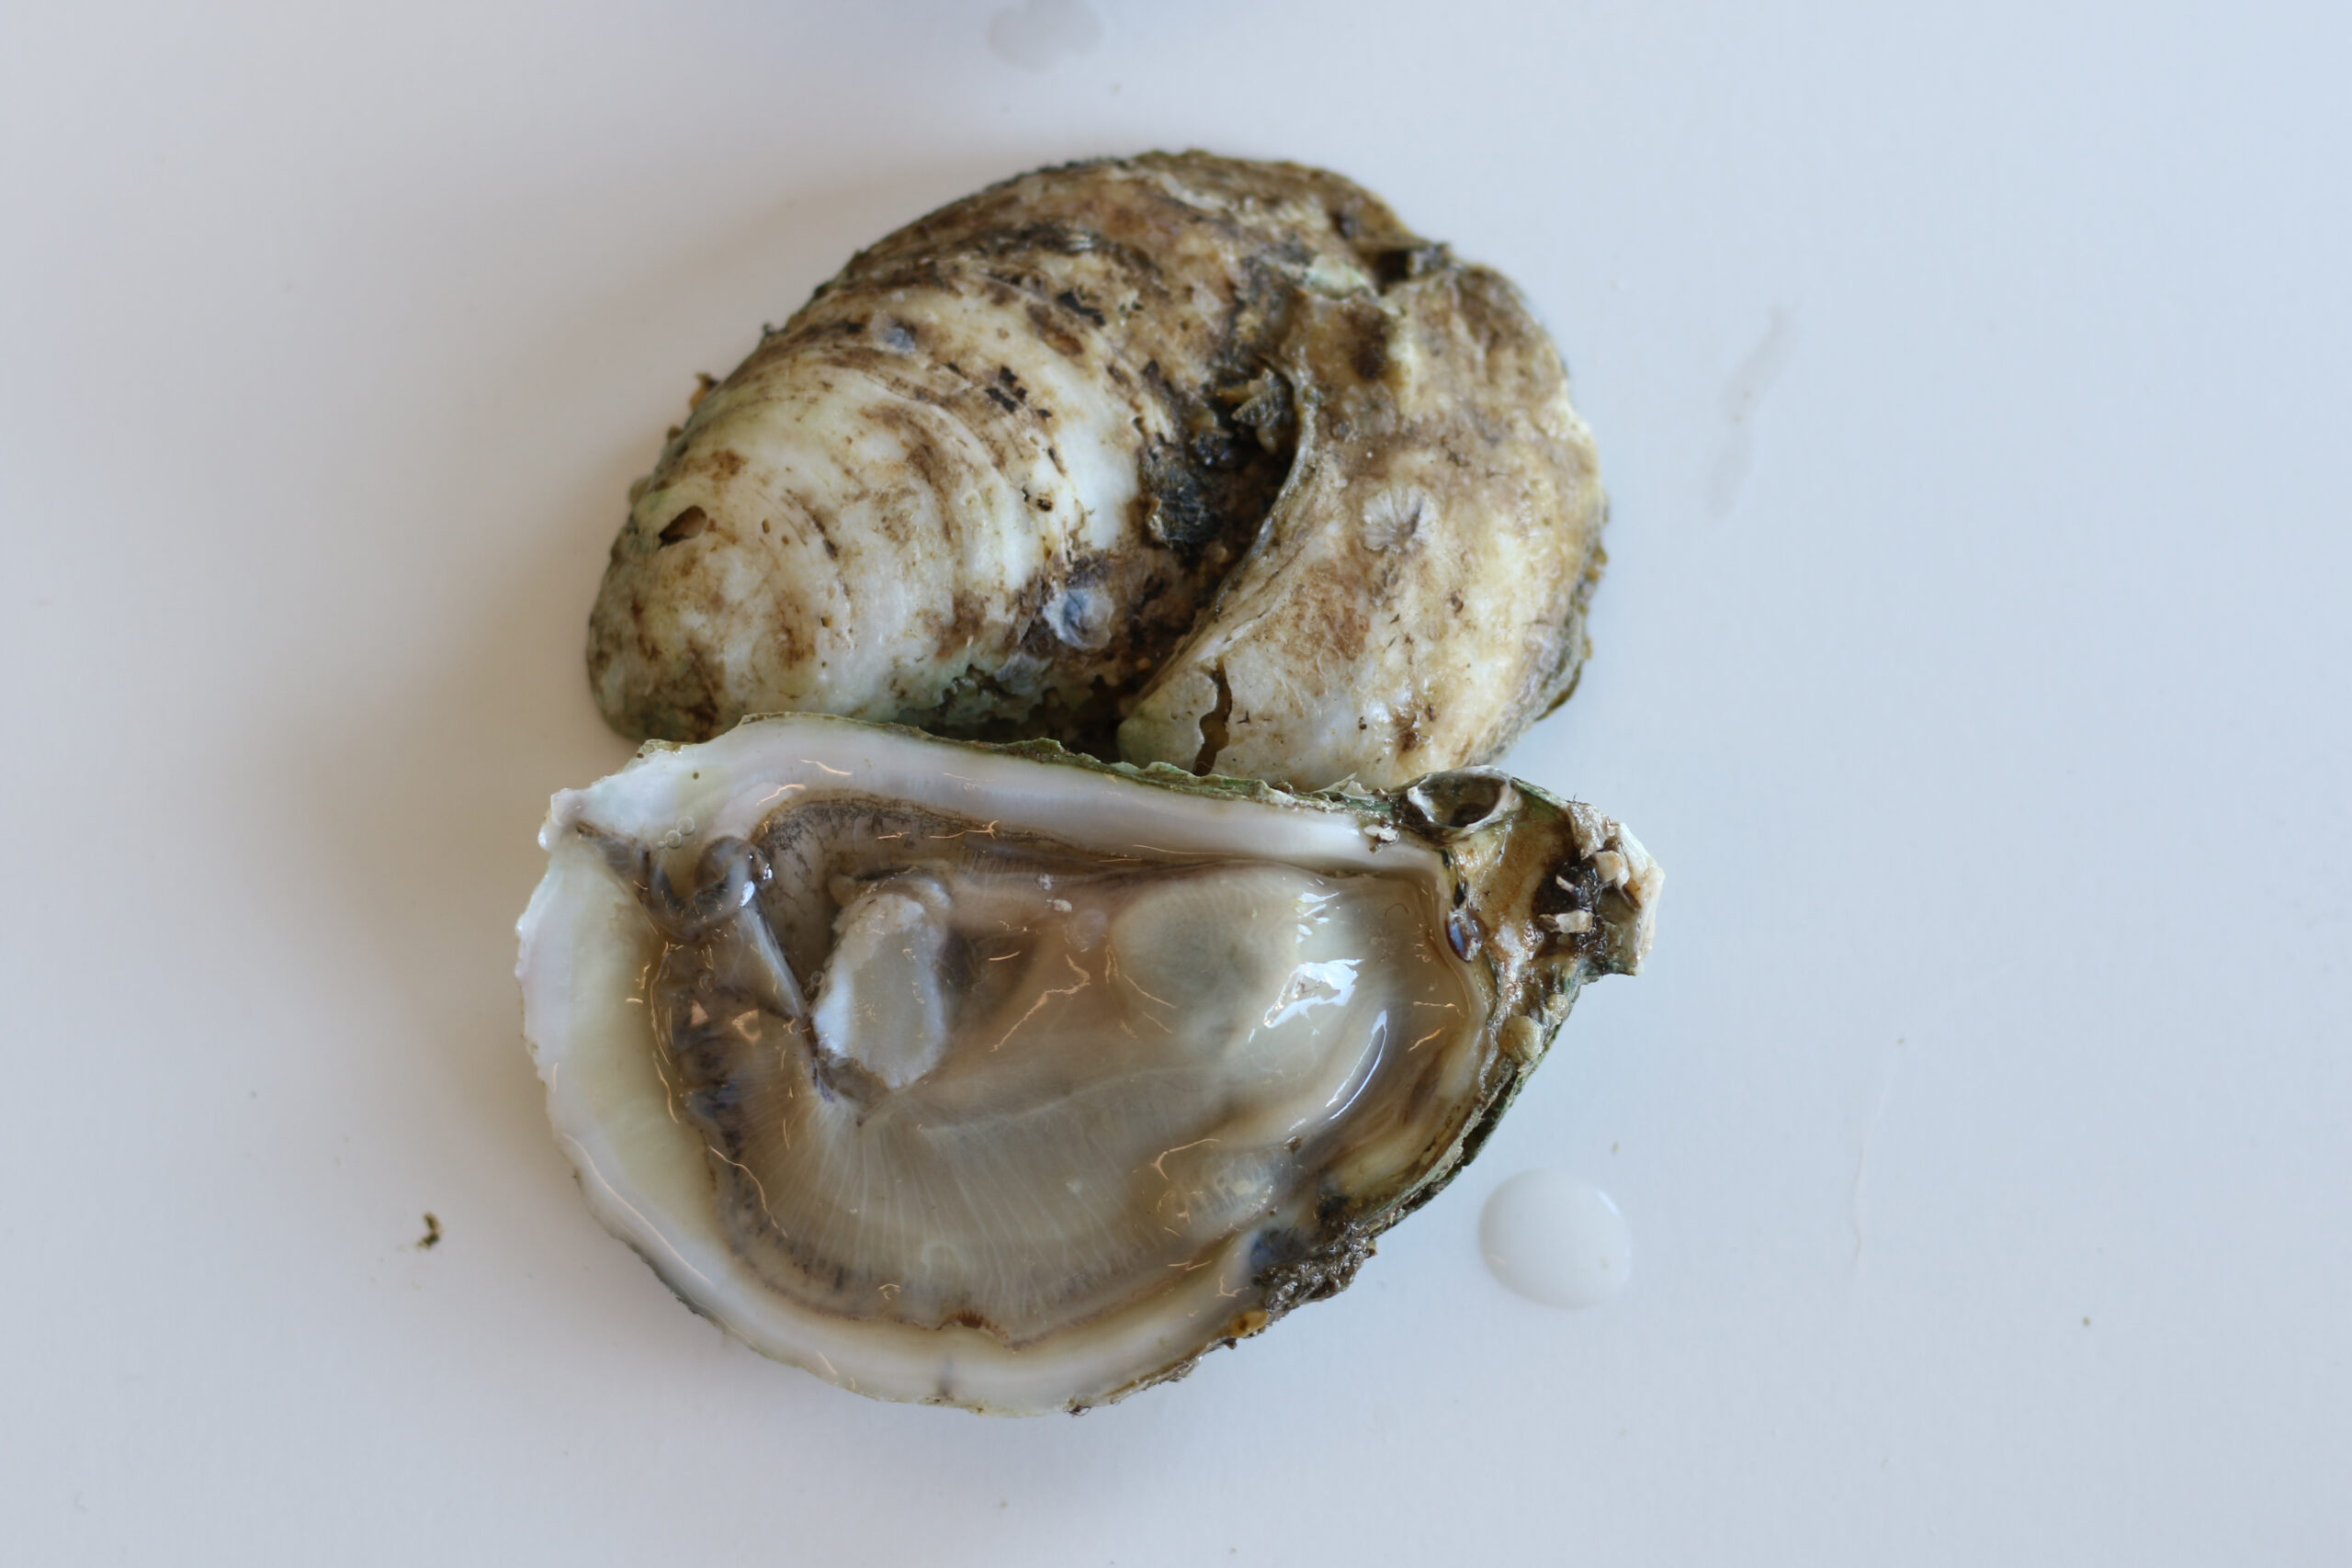 Blue Point Oyster at Santa Rosa Seafood (Heather Irwin)